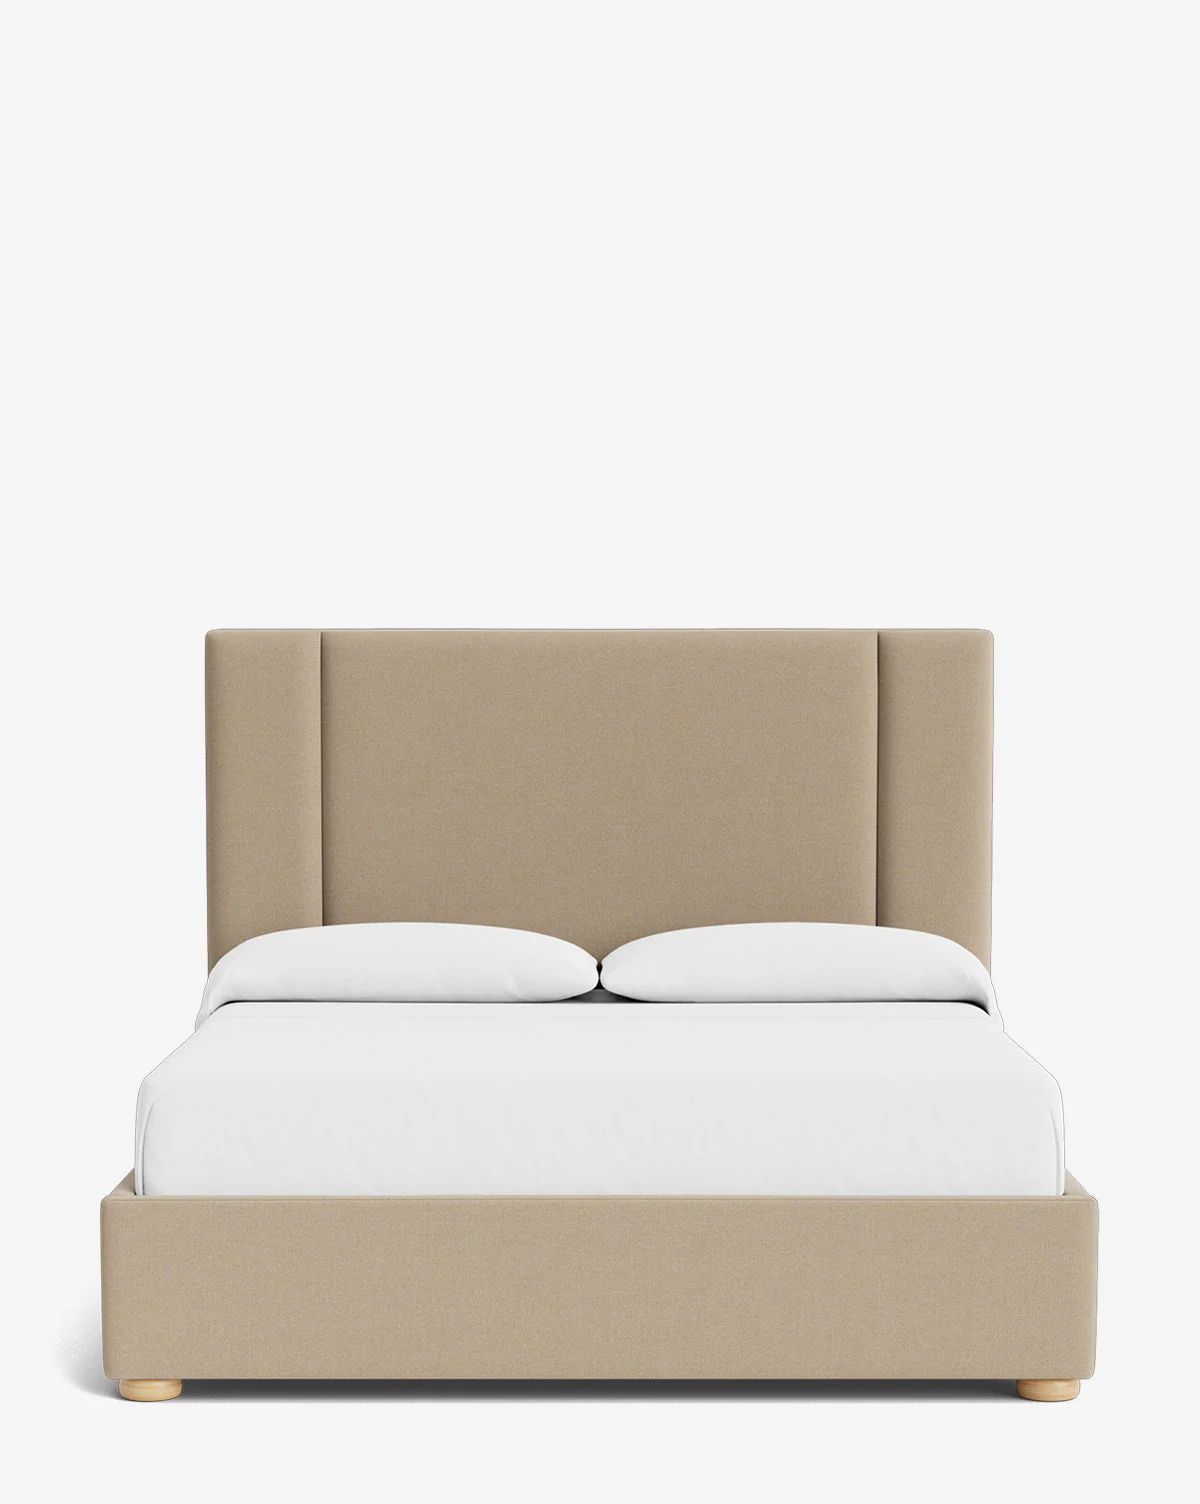 Mina Upholstered Bed | McGee & Co.